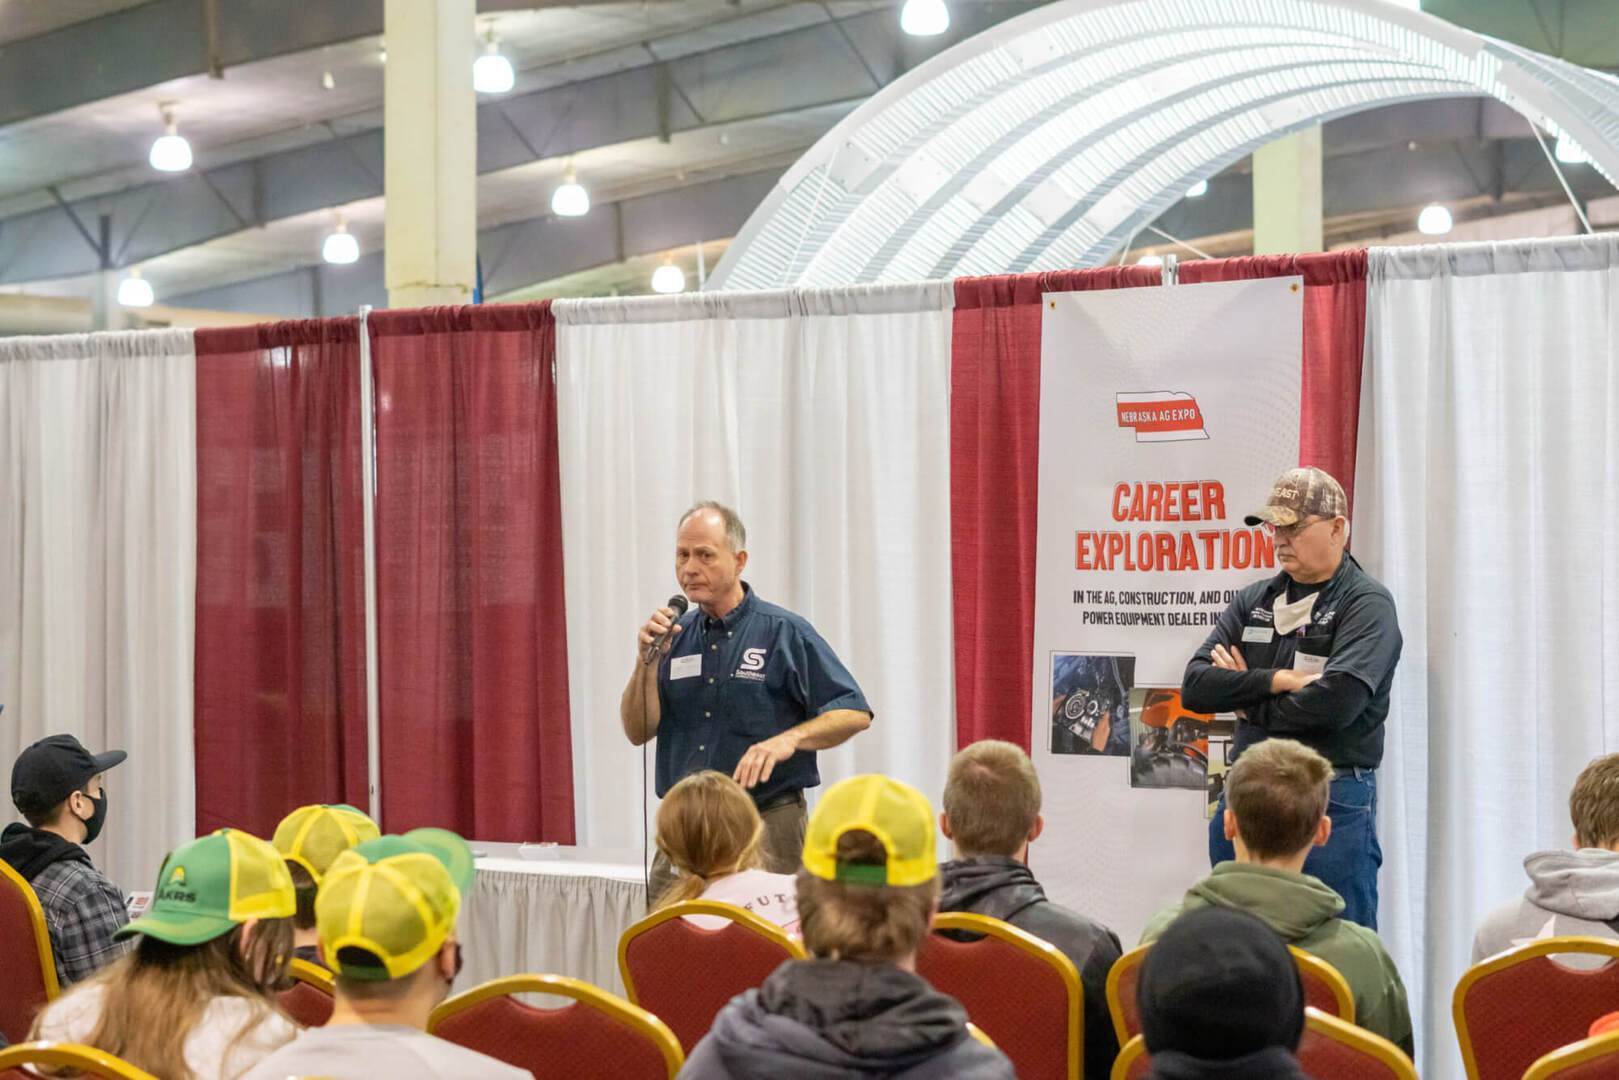 Dealership employees present to students at the career event